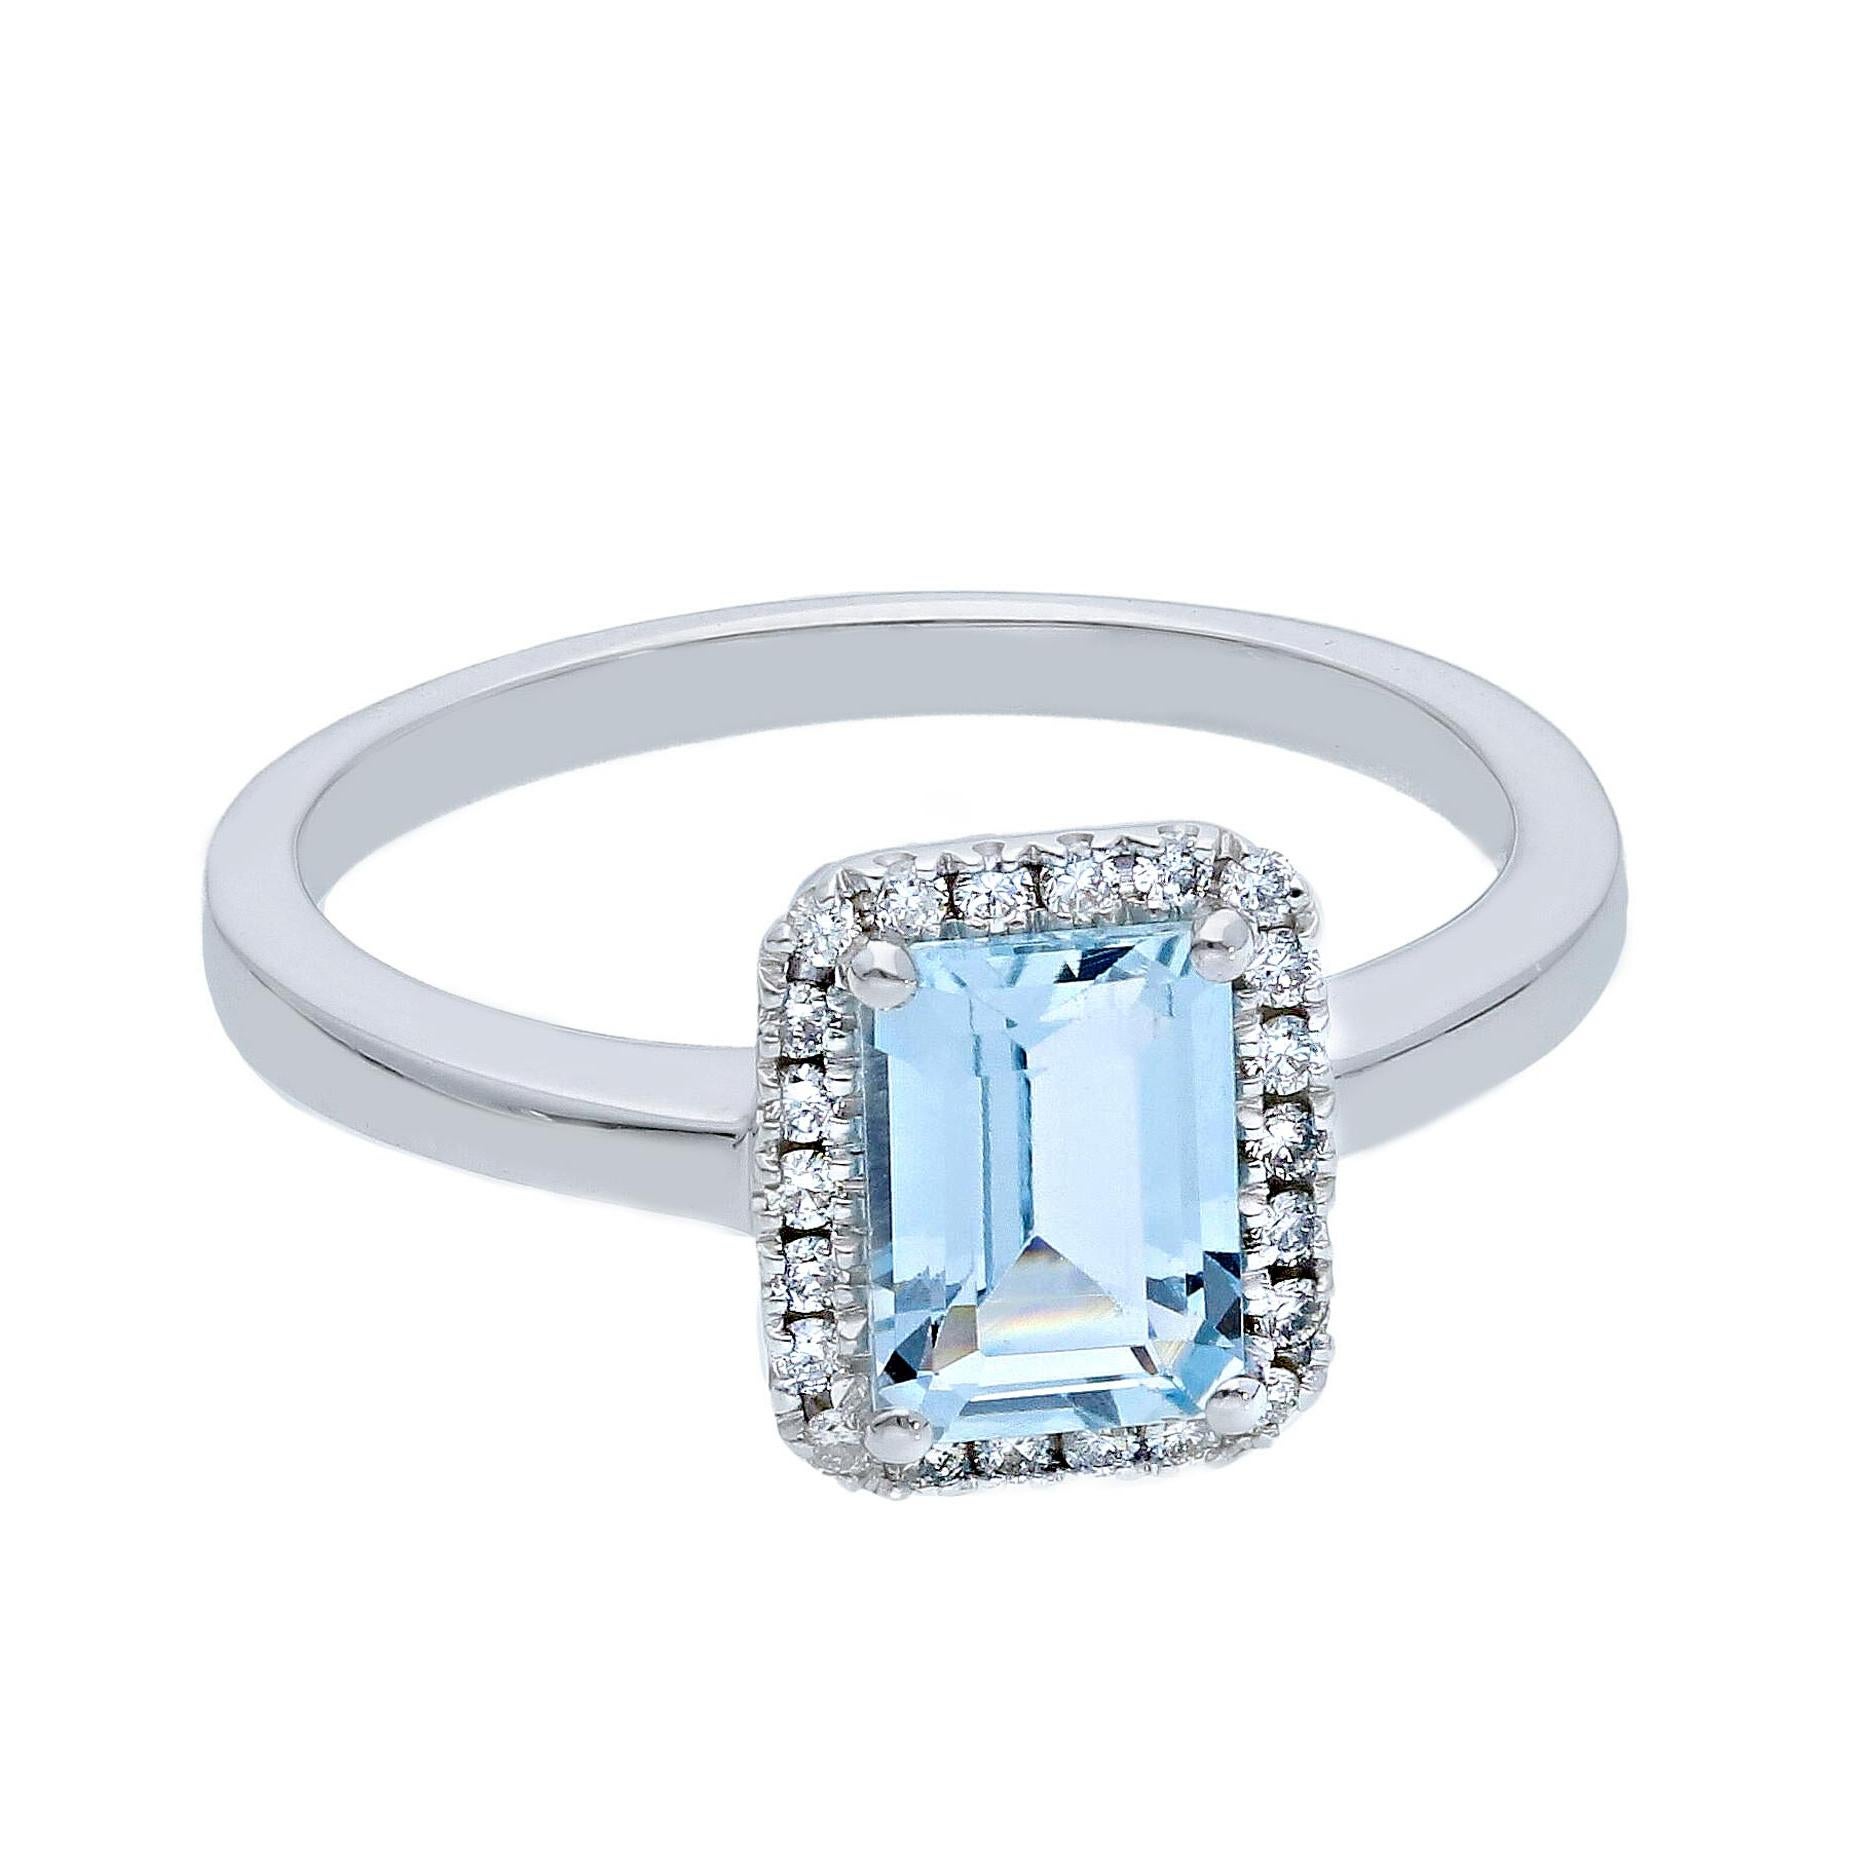 For Sale:  18K White Gold Pradera Colourful Engagement Ring with Aquamarina and Diamonds 2